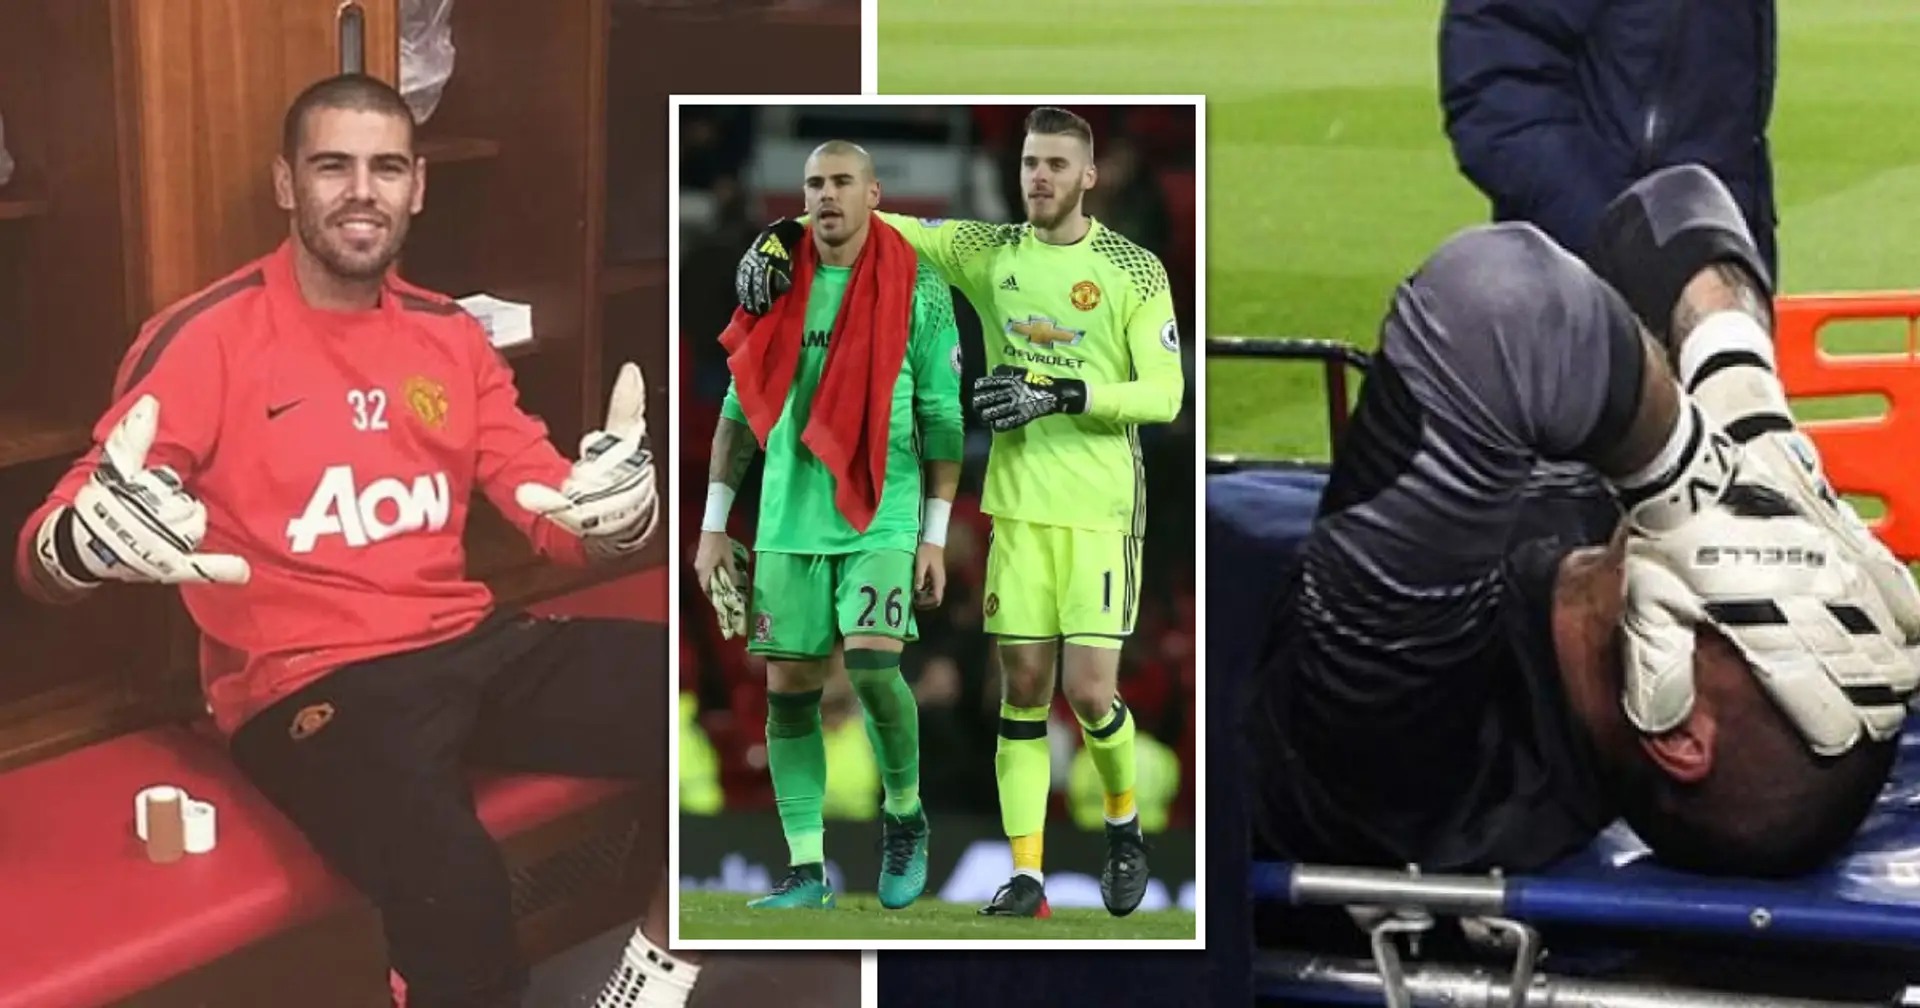 'I don't want to remember the last six months': Victor Valdes gives honest verdict about his time at Man United